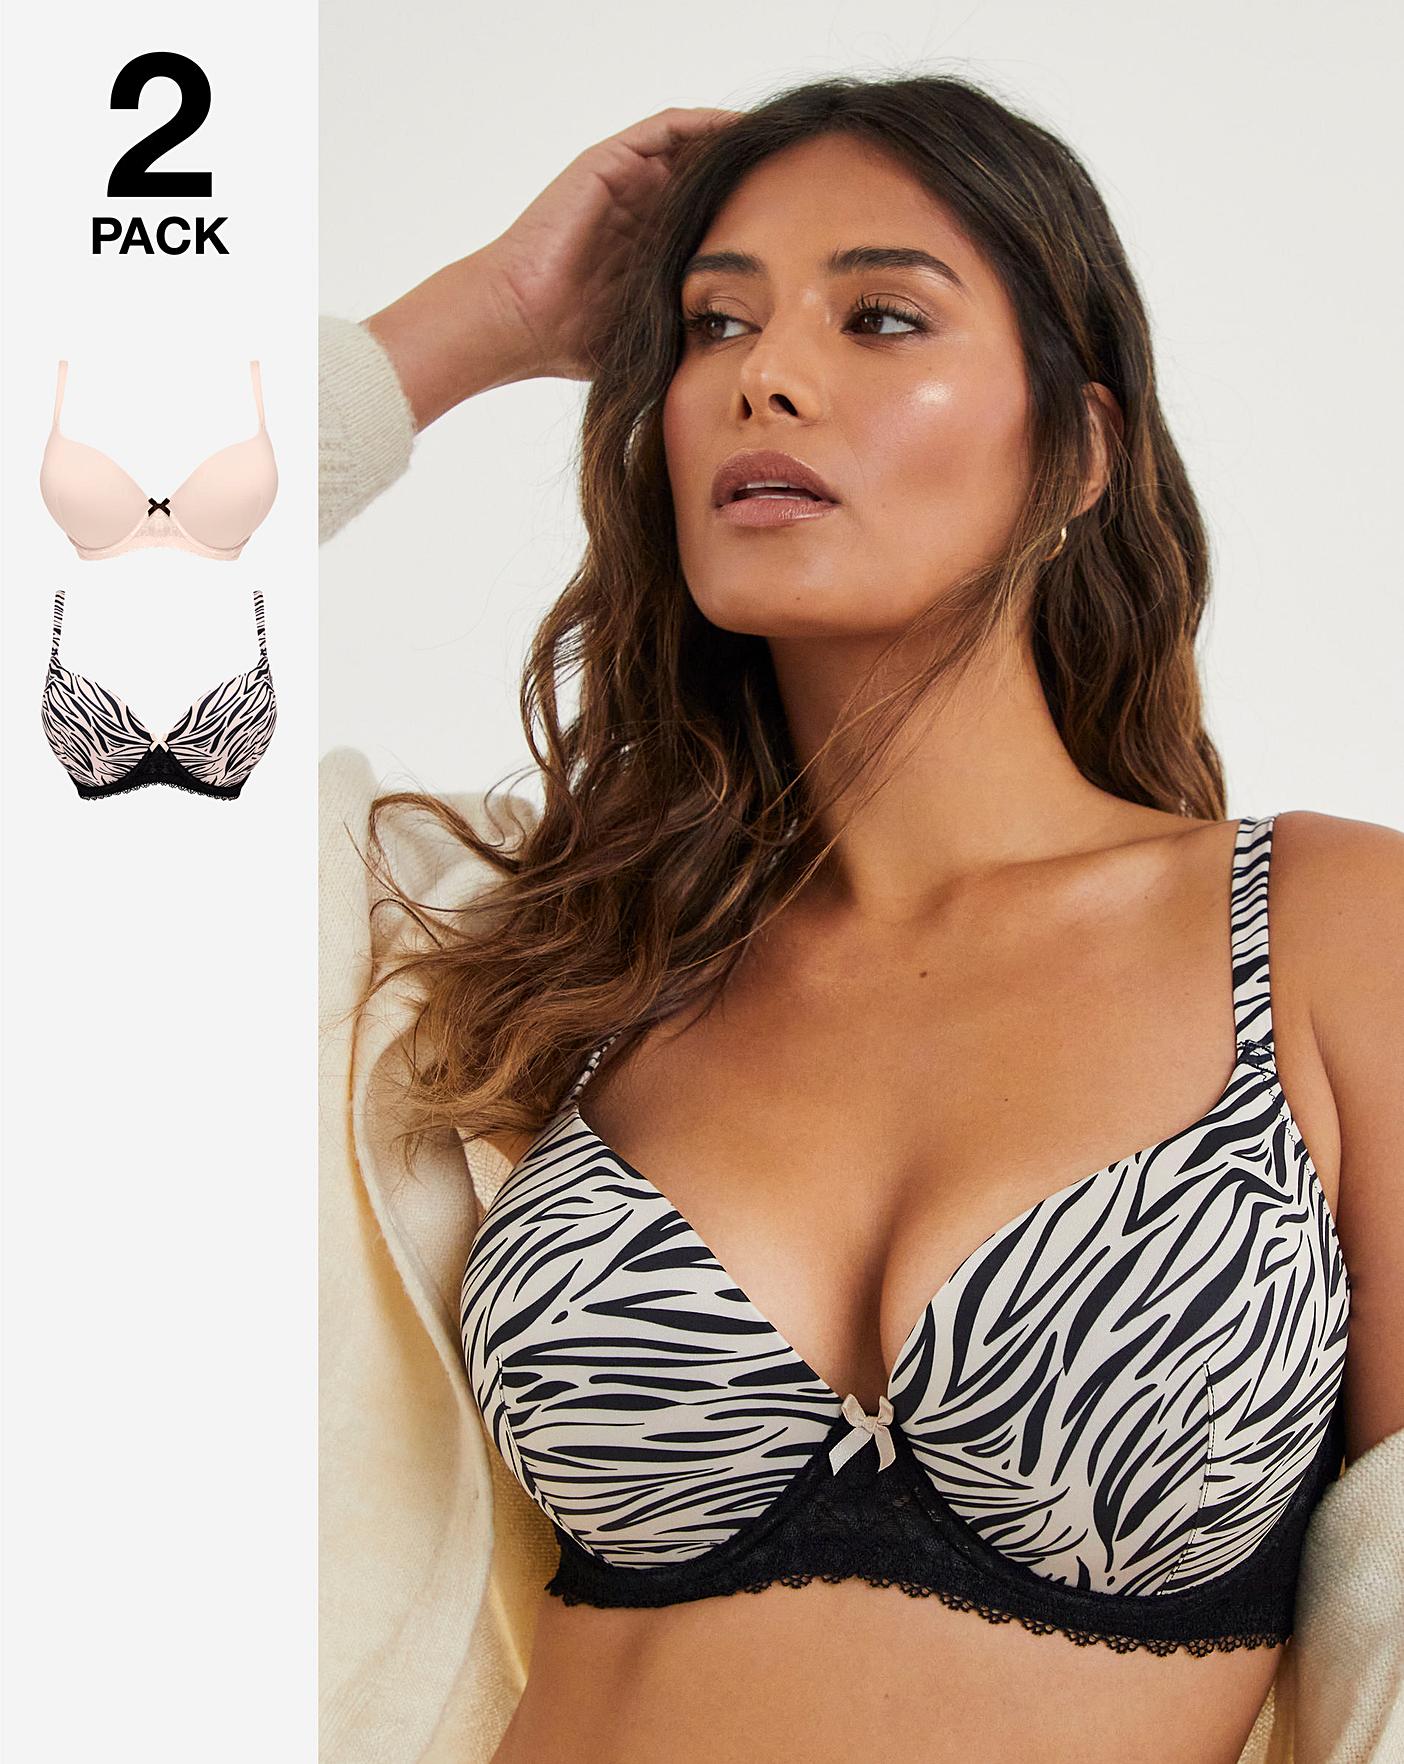 2 Pack Hook and Eye Blk/Wht Bras